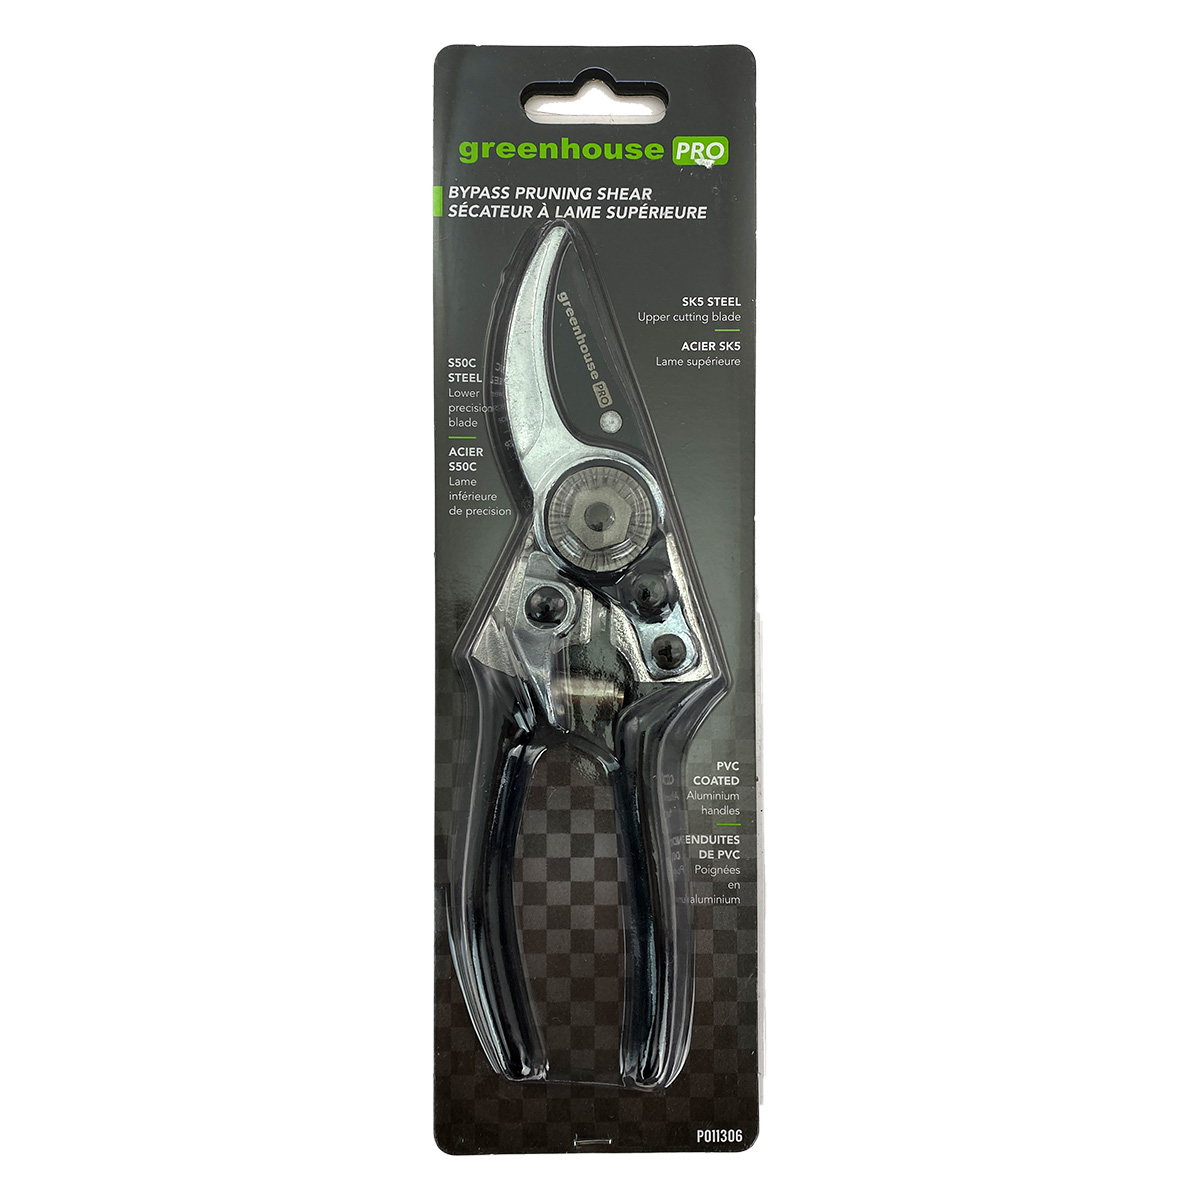 Holland Greenhouse Pro Bypass Pruning Shear P011306